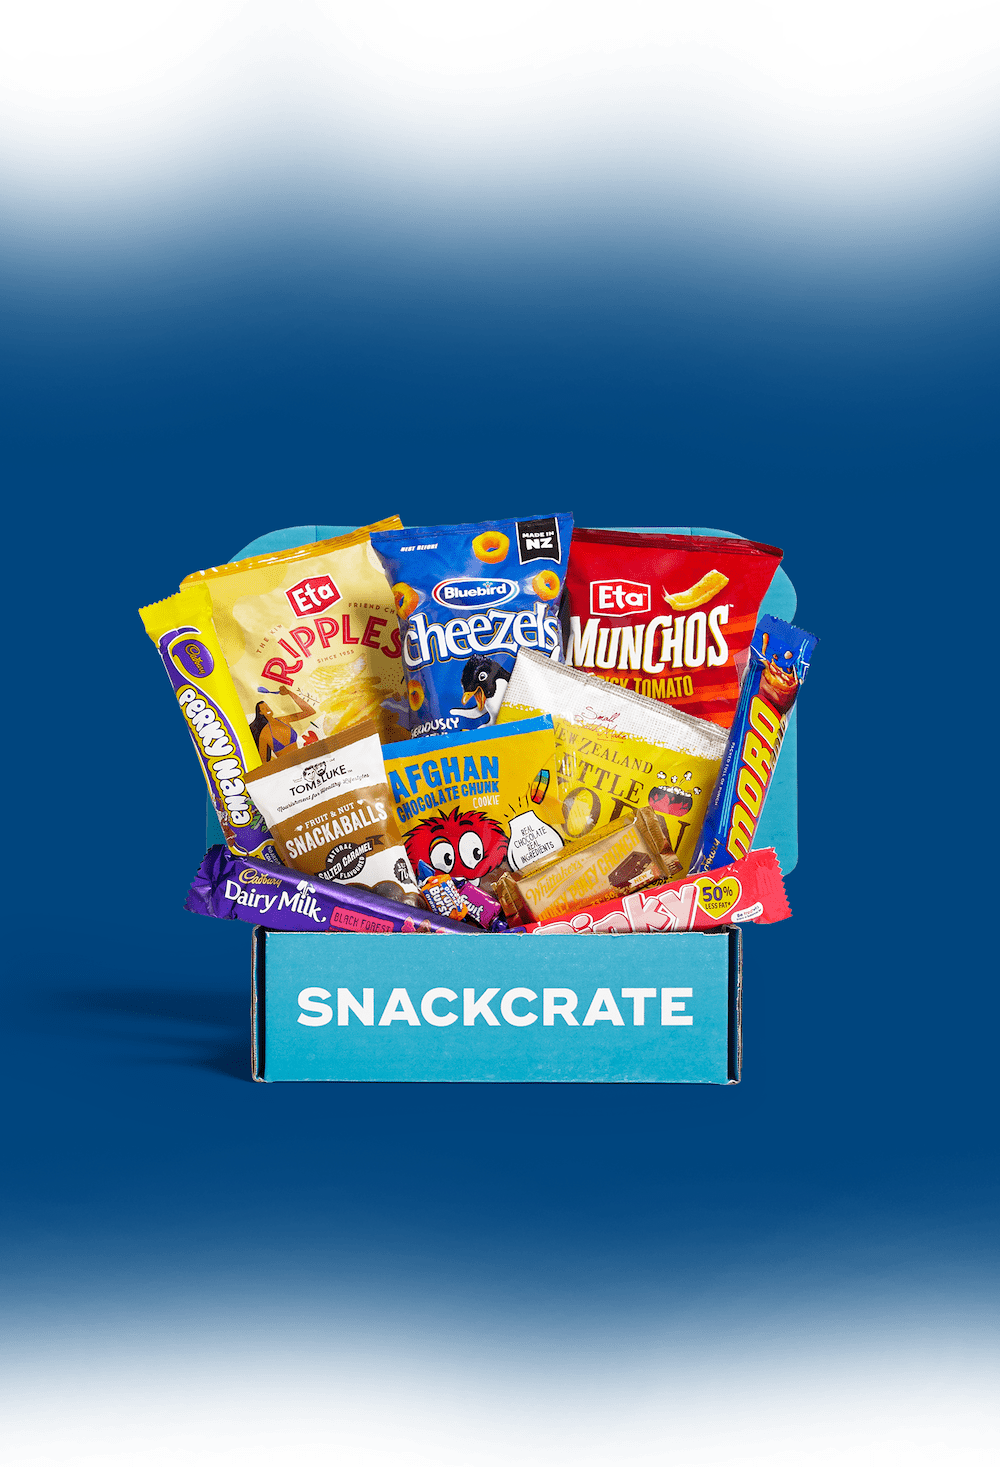 New Zealand SnackCrate box